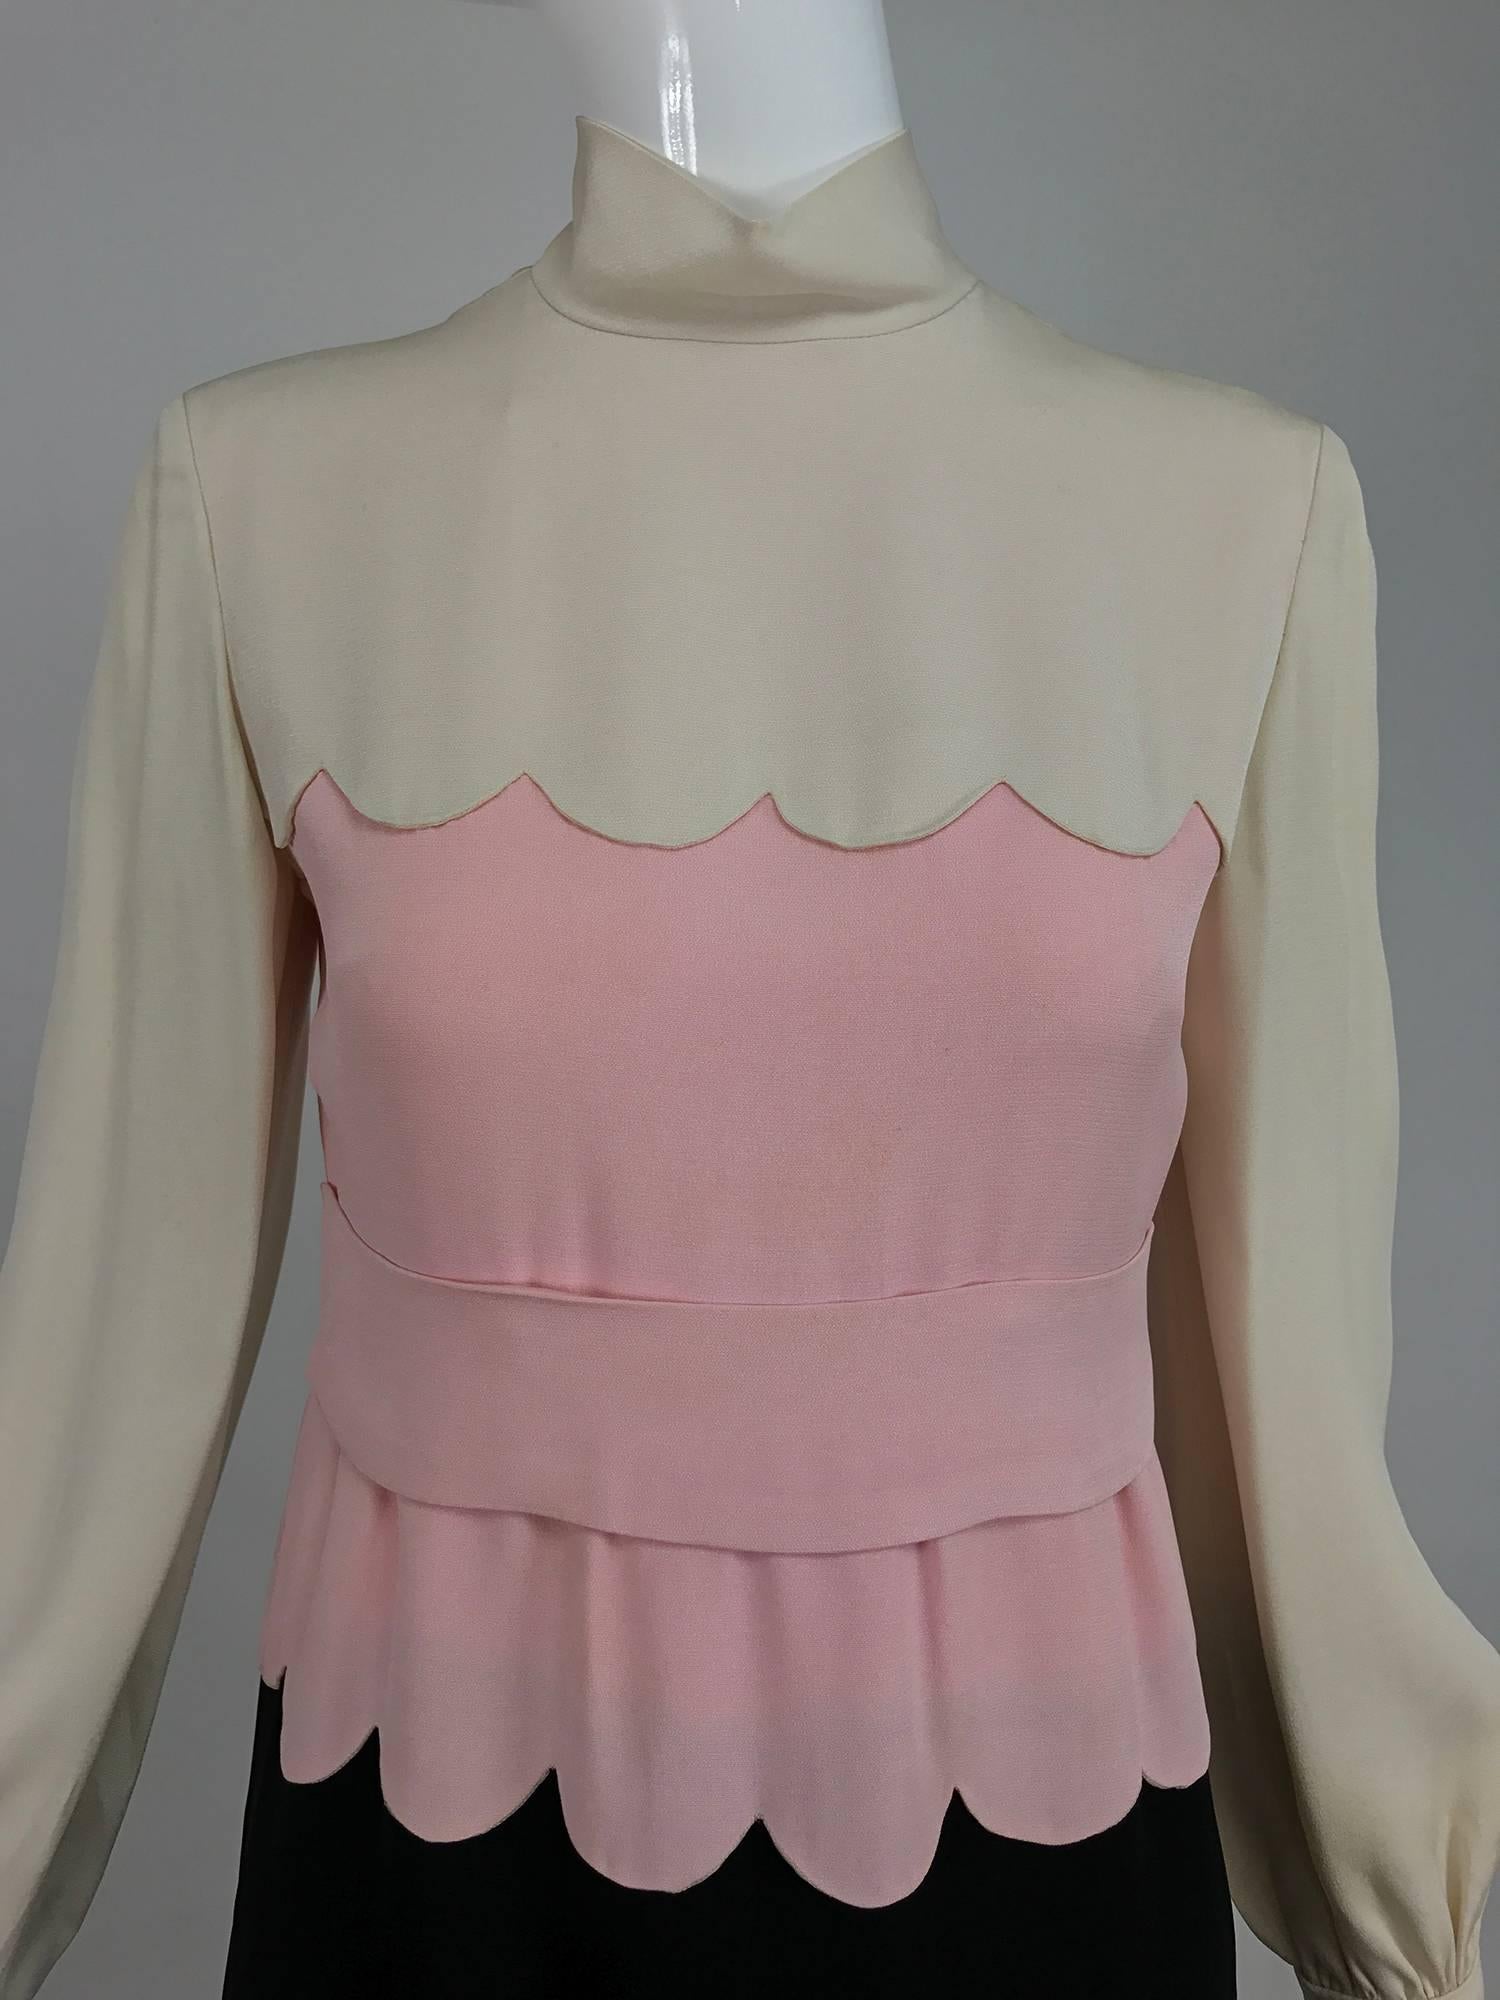 Donald Brooks scalloped crepe dress in cream pink and black 1960s 4